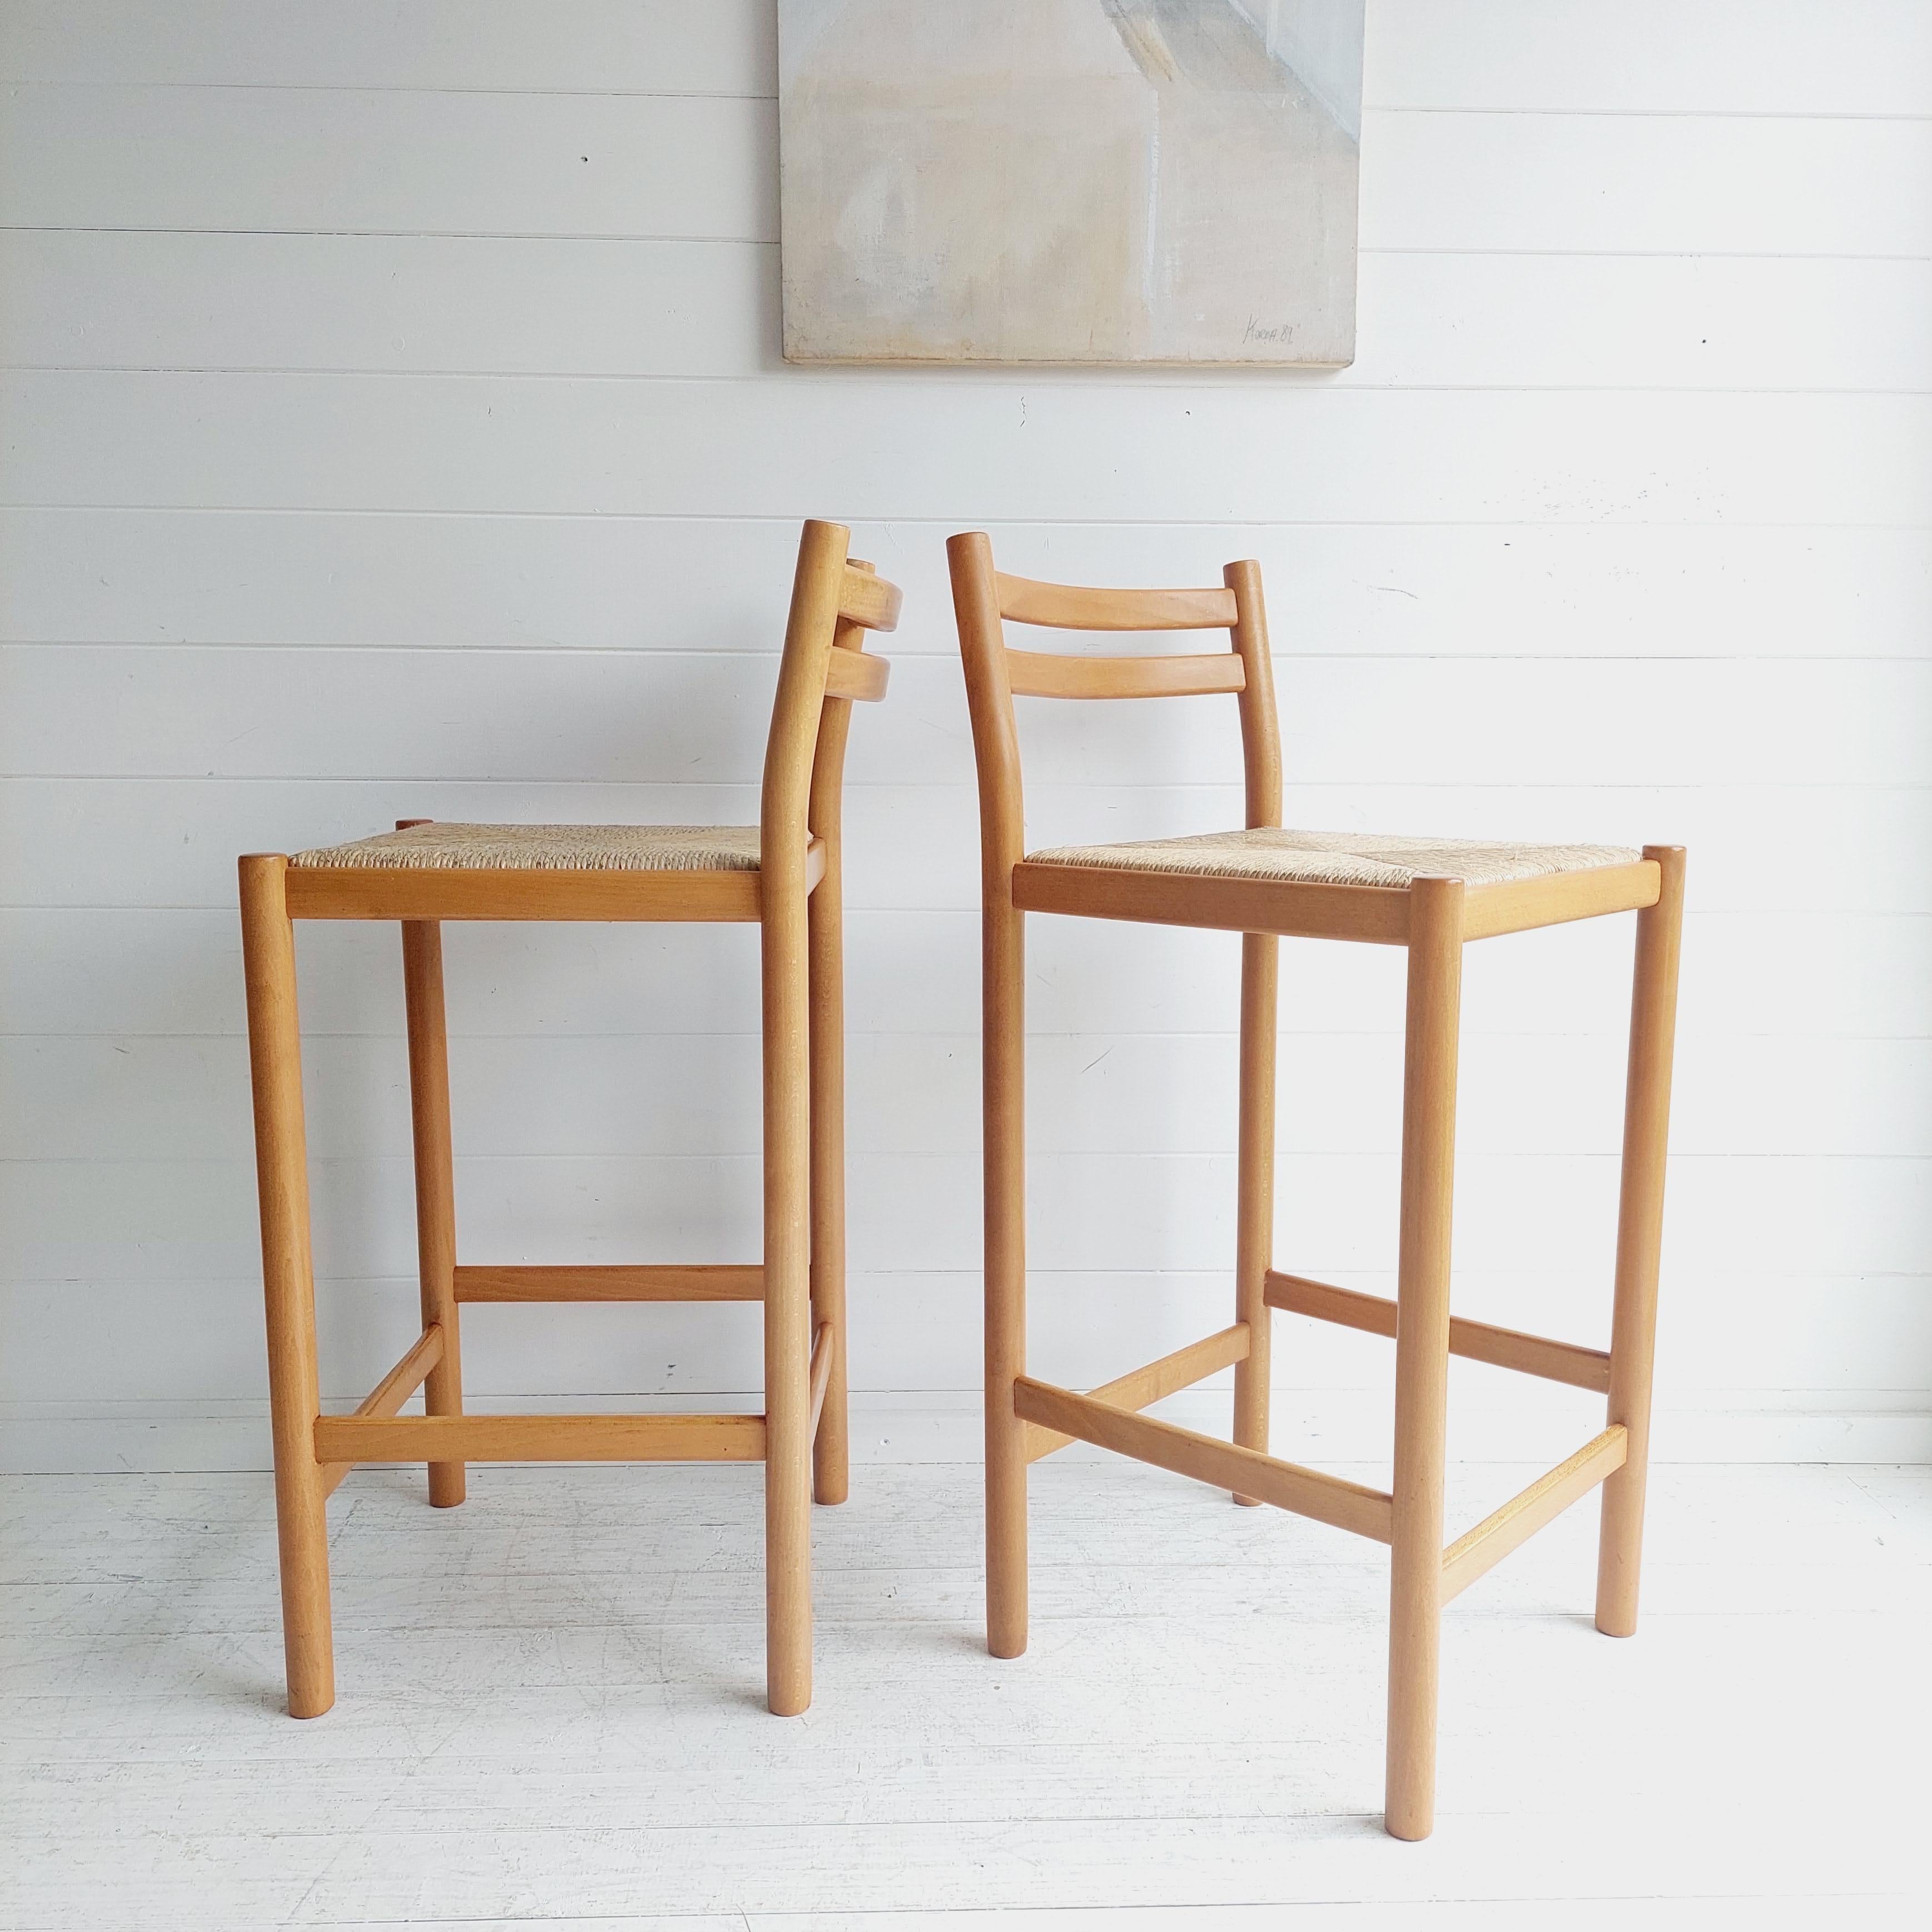 Midcentury bar stool pair.
circa 1970s, England.
Designed in the style of Vico Magisretti for Cassina, circa 1960s, Italy.

Rush seats, beech frame
Rounded wood frame has a curved, laddrered back and a wide, hand rushed seat that begs you to